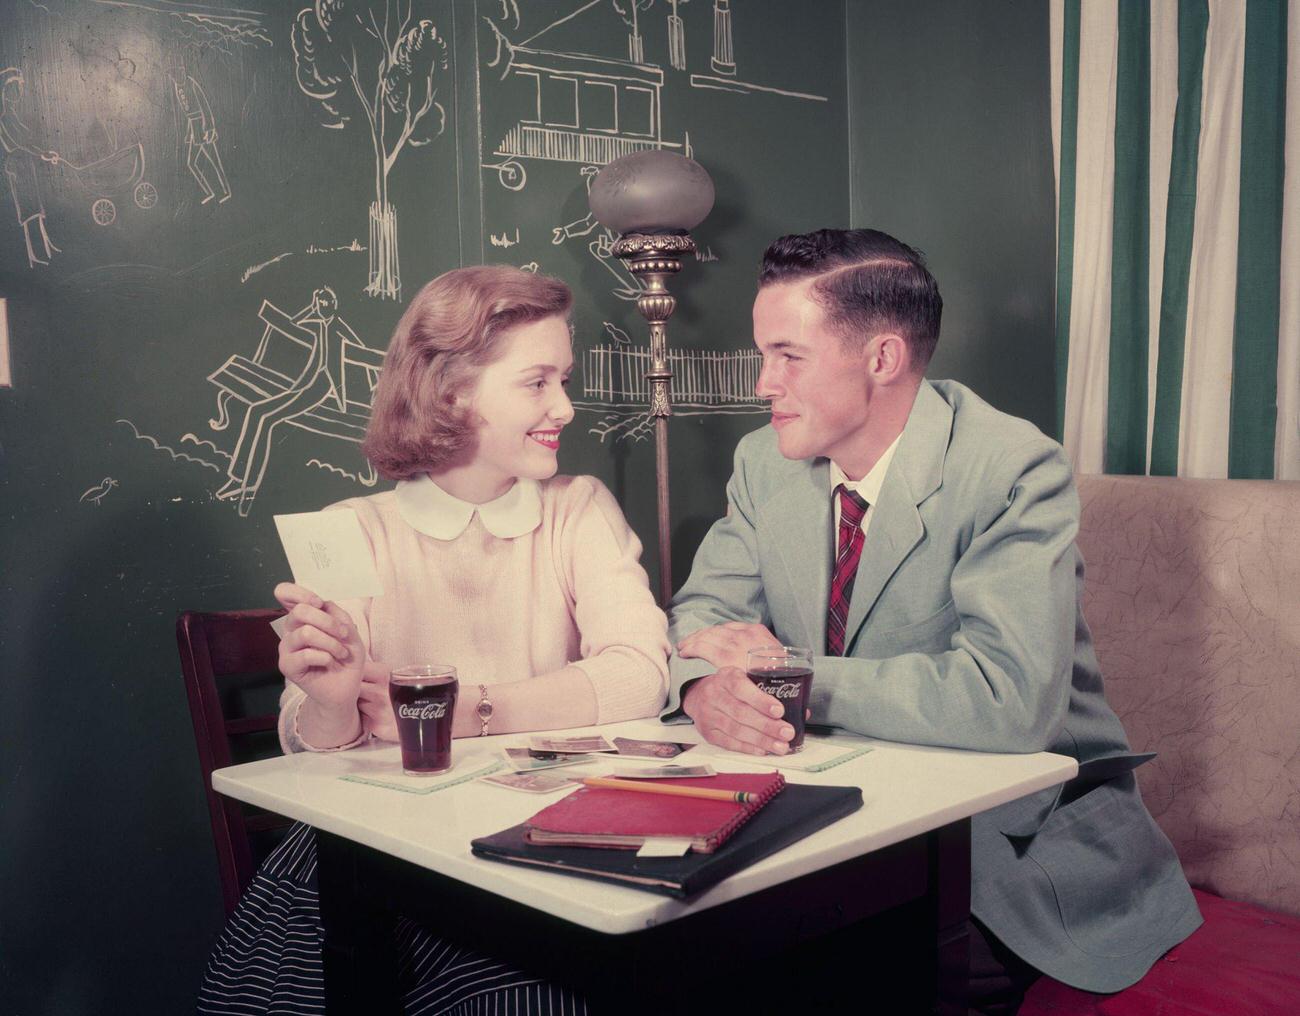 A couple sitting at a table having a Coca-Cola.